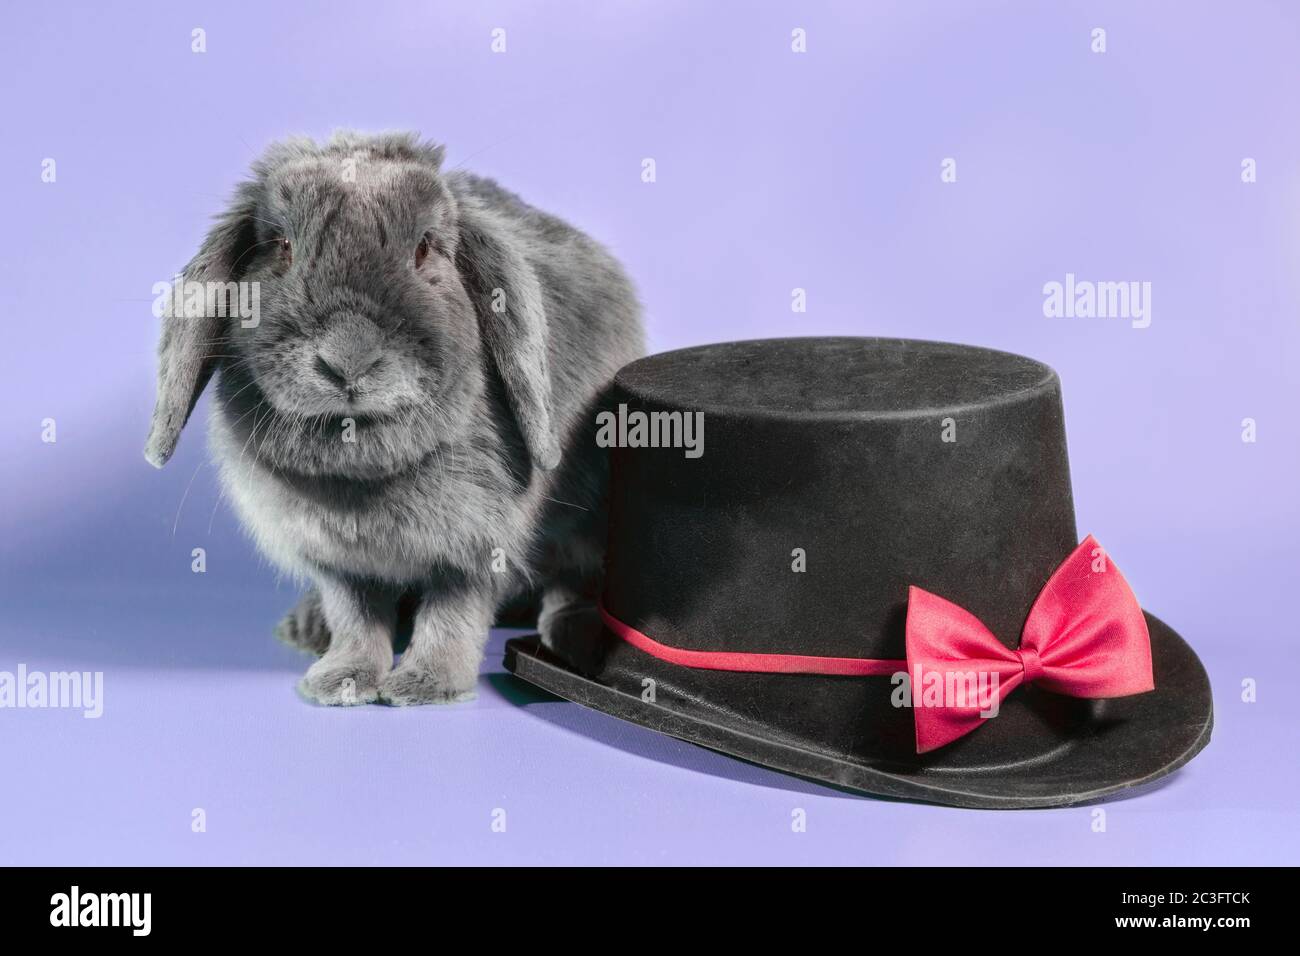 lop-eared dwarf rabbit next to a black cylinder hat on a violet background Stock Photo